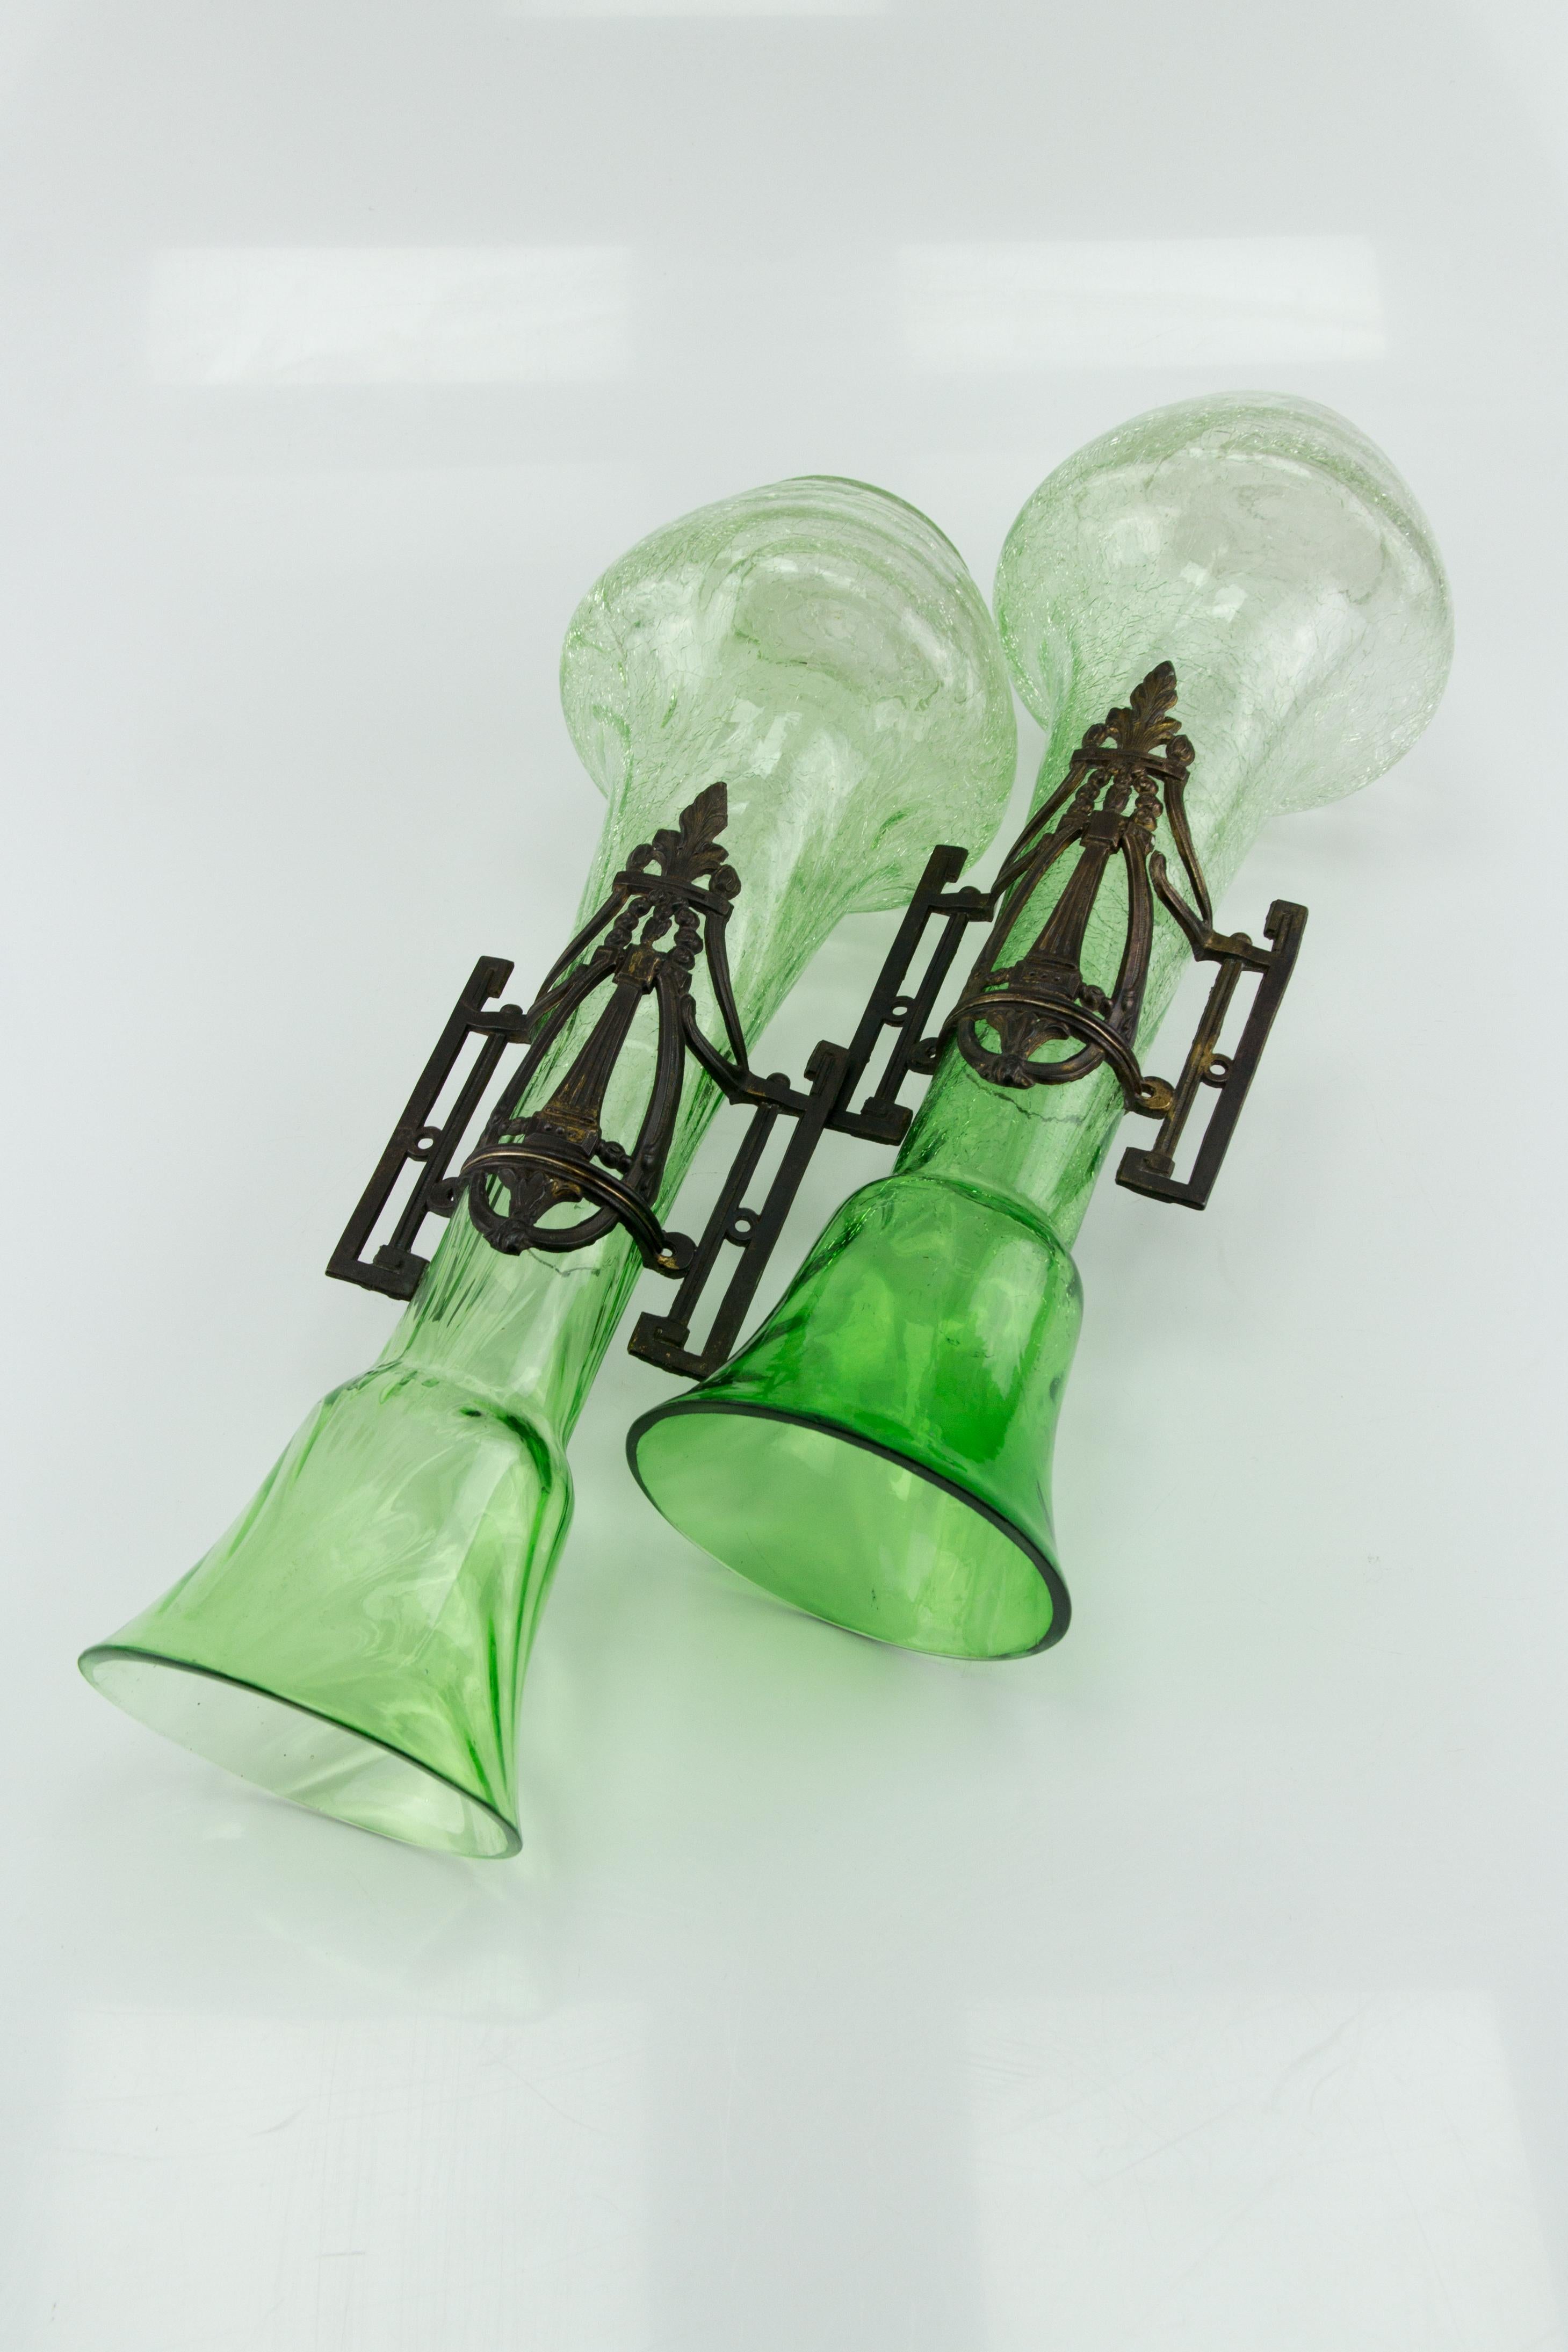 Pair of Large Art Nouveau Green Crackle Glass Vases, circa 1930s For Sale 10